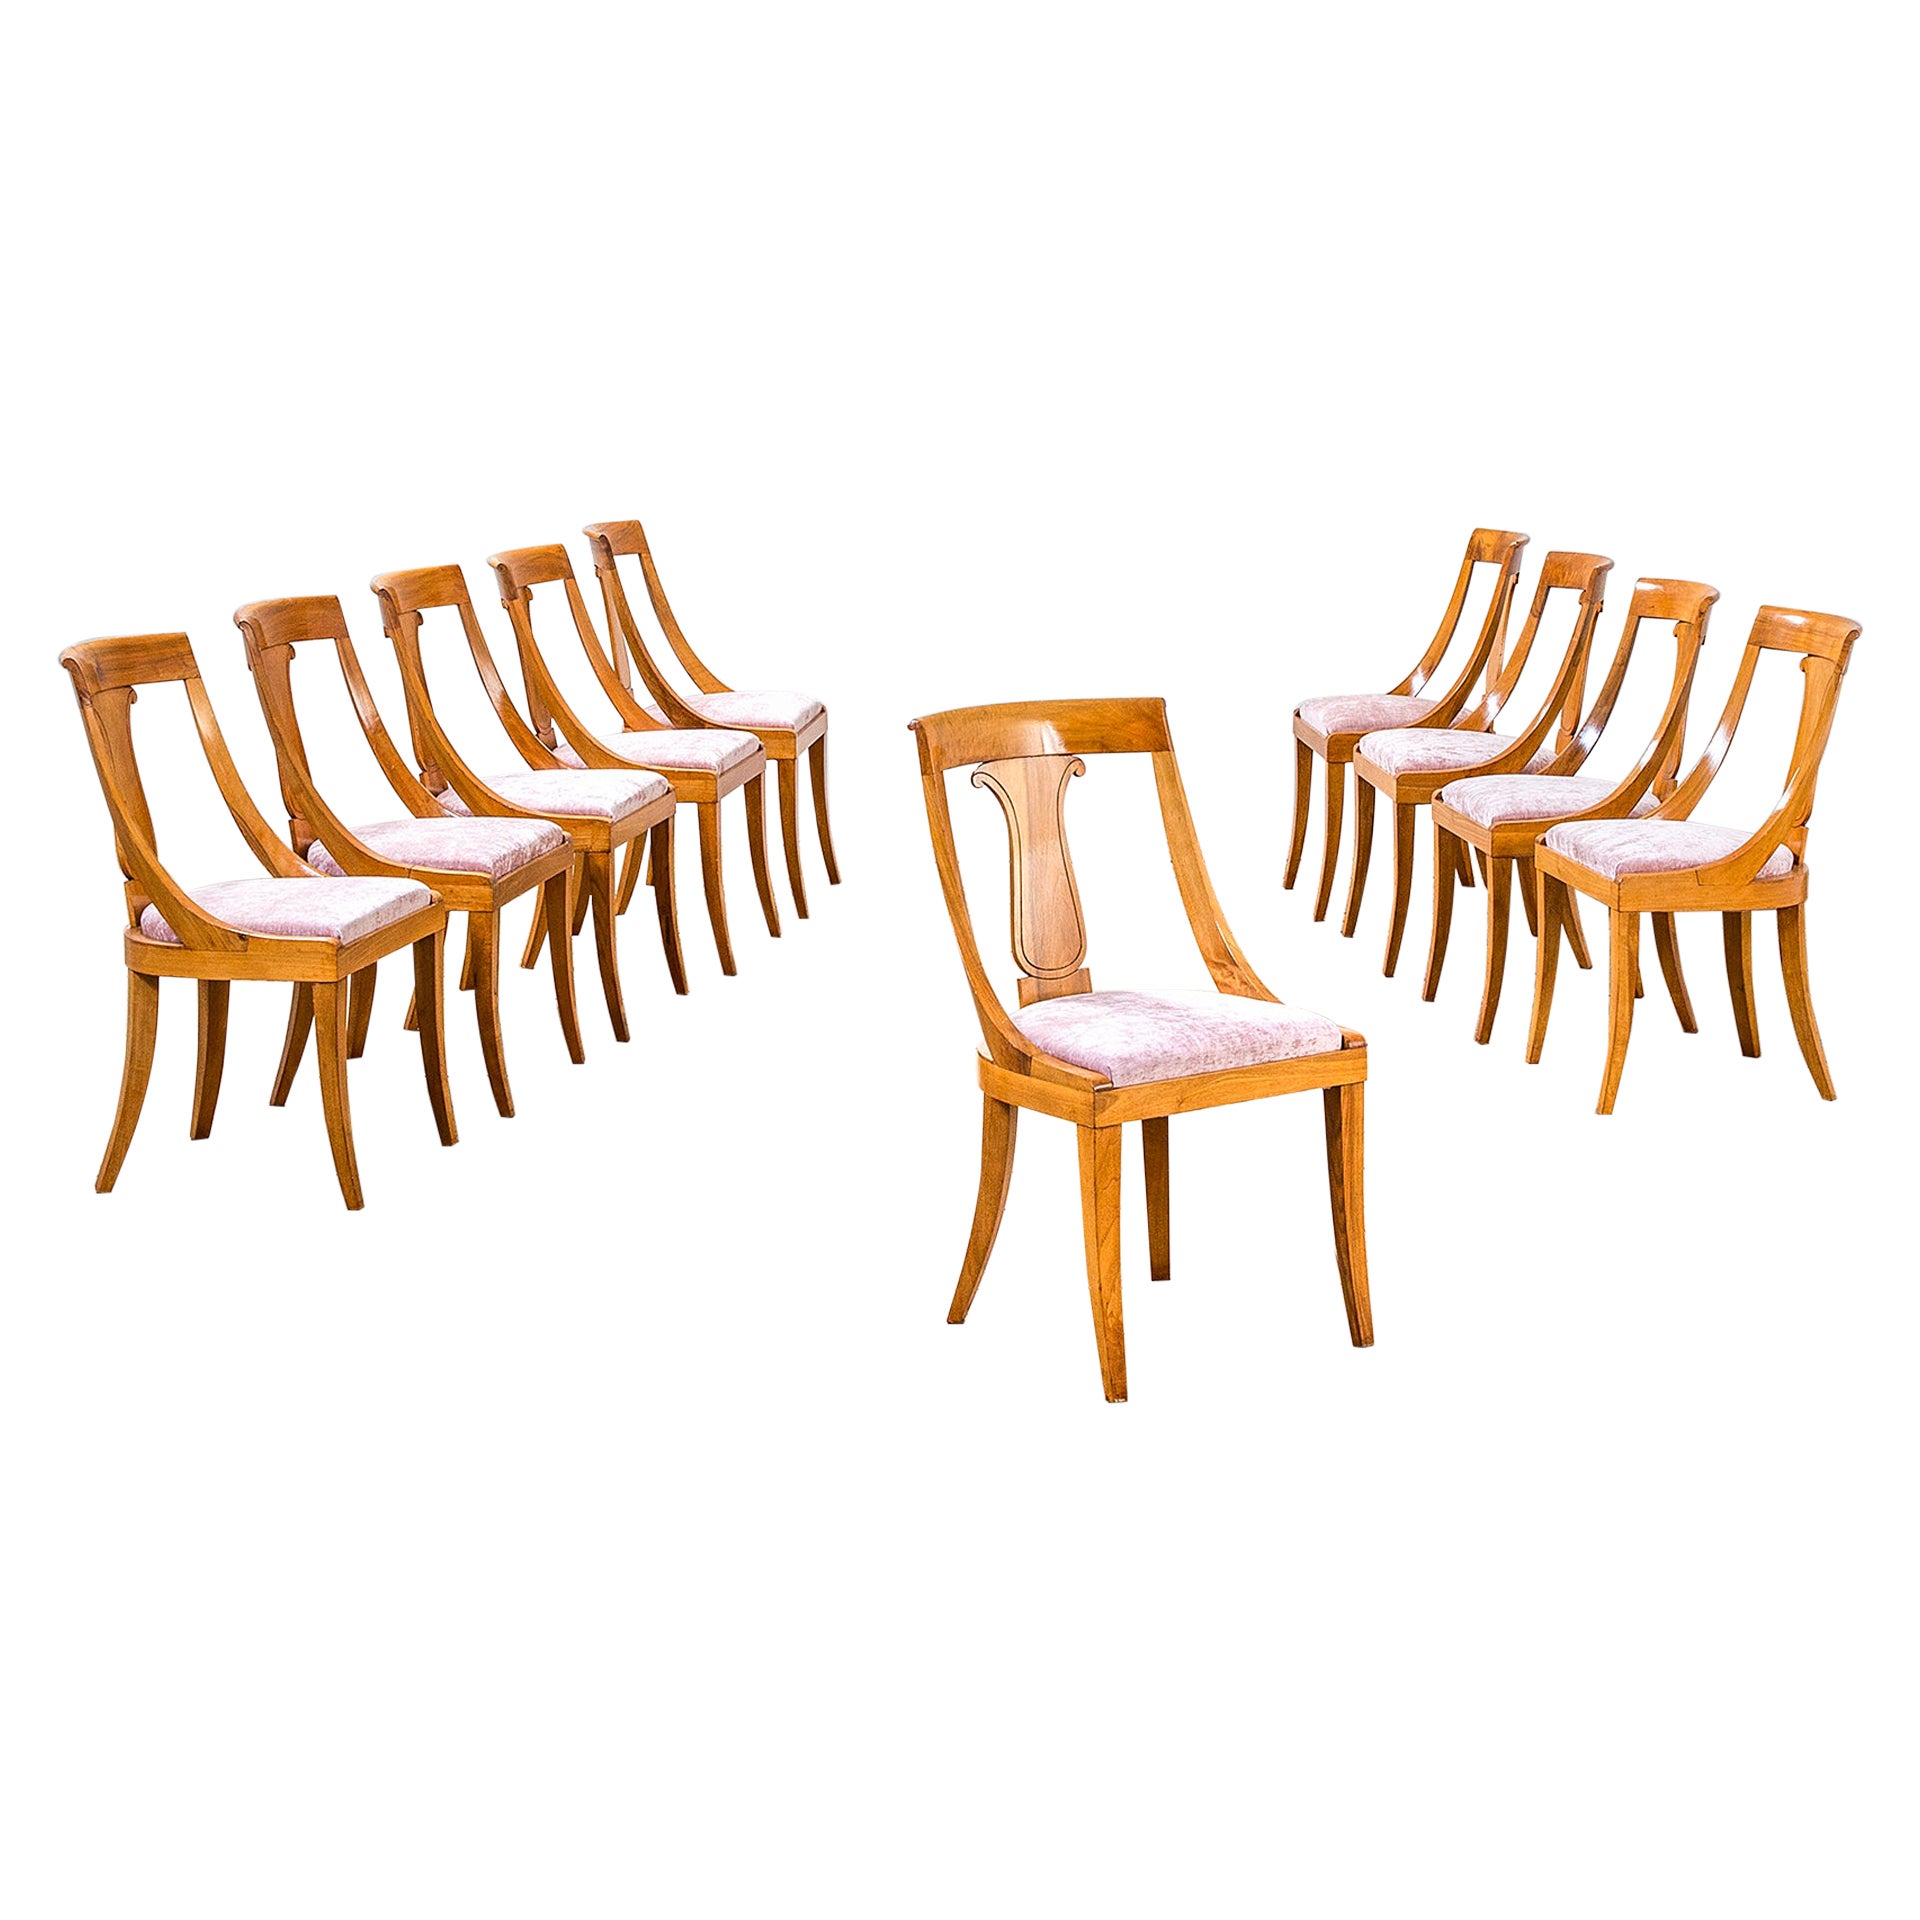 20th Century Bbpr Set of 10 Chairs in Wood and Light Pink Fabric